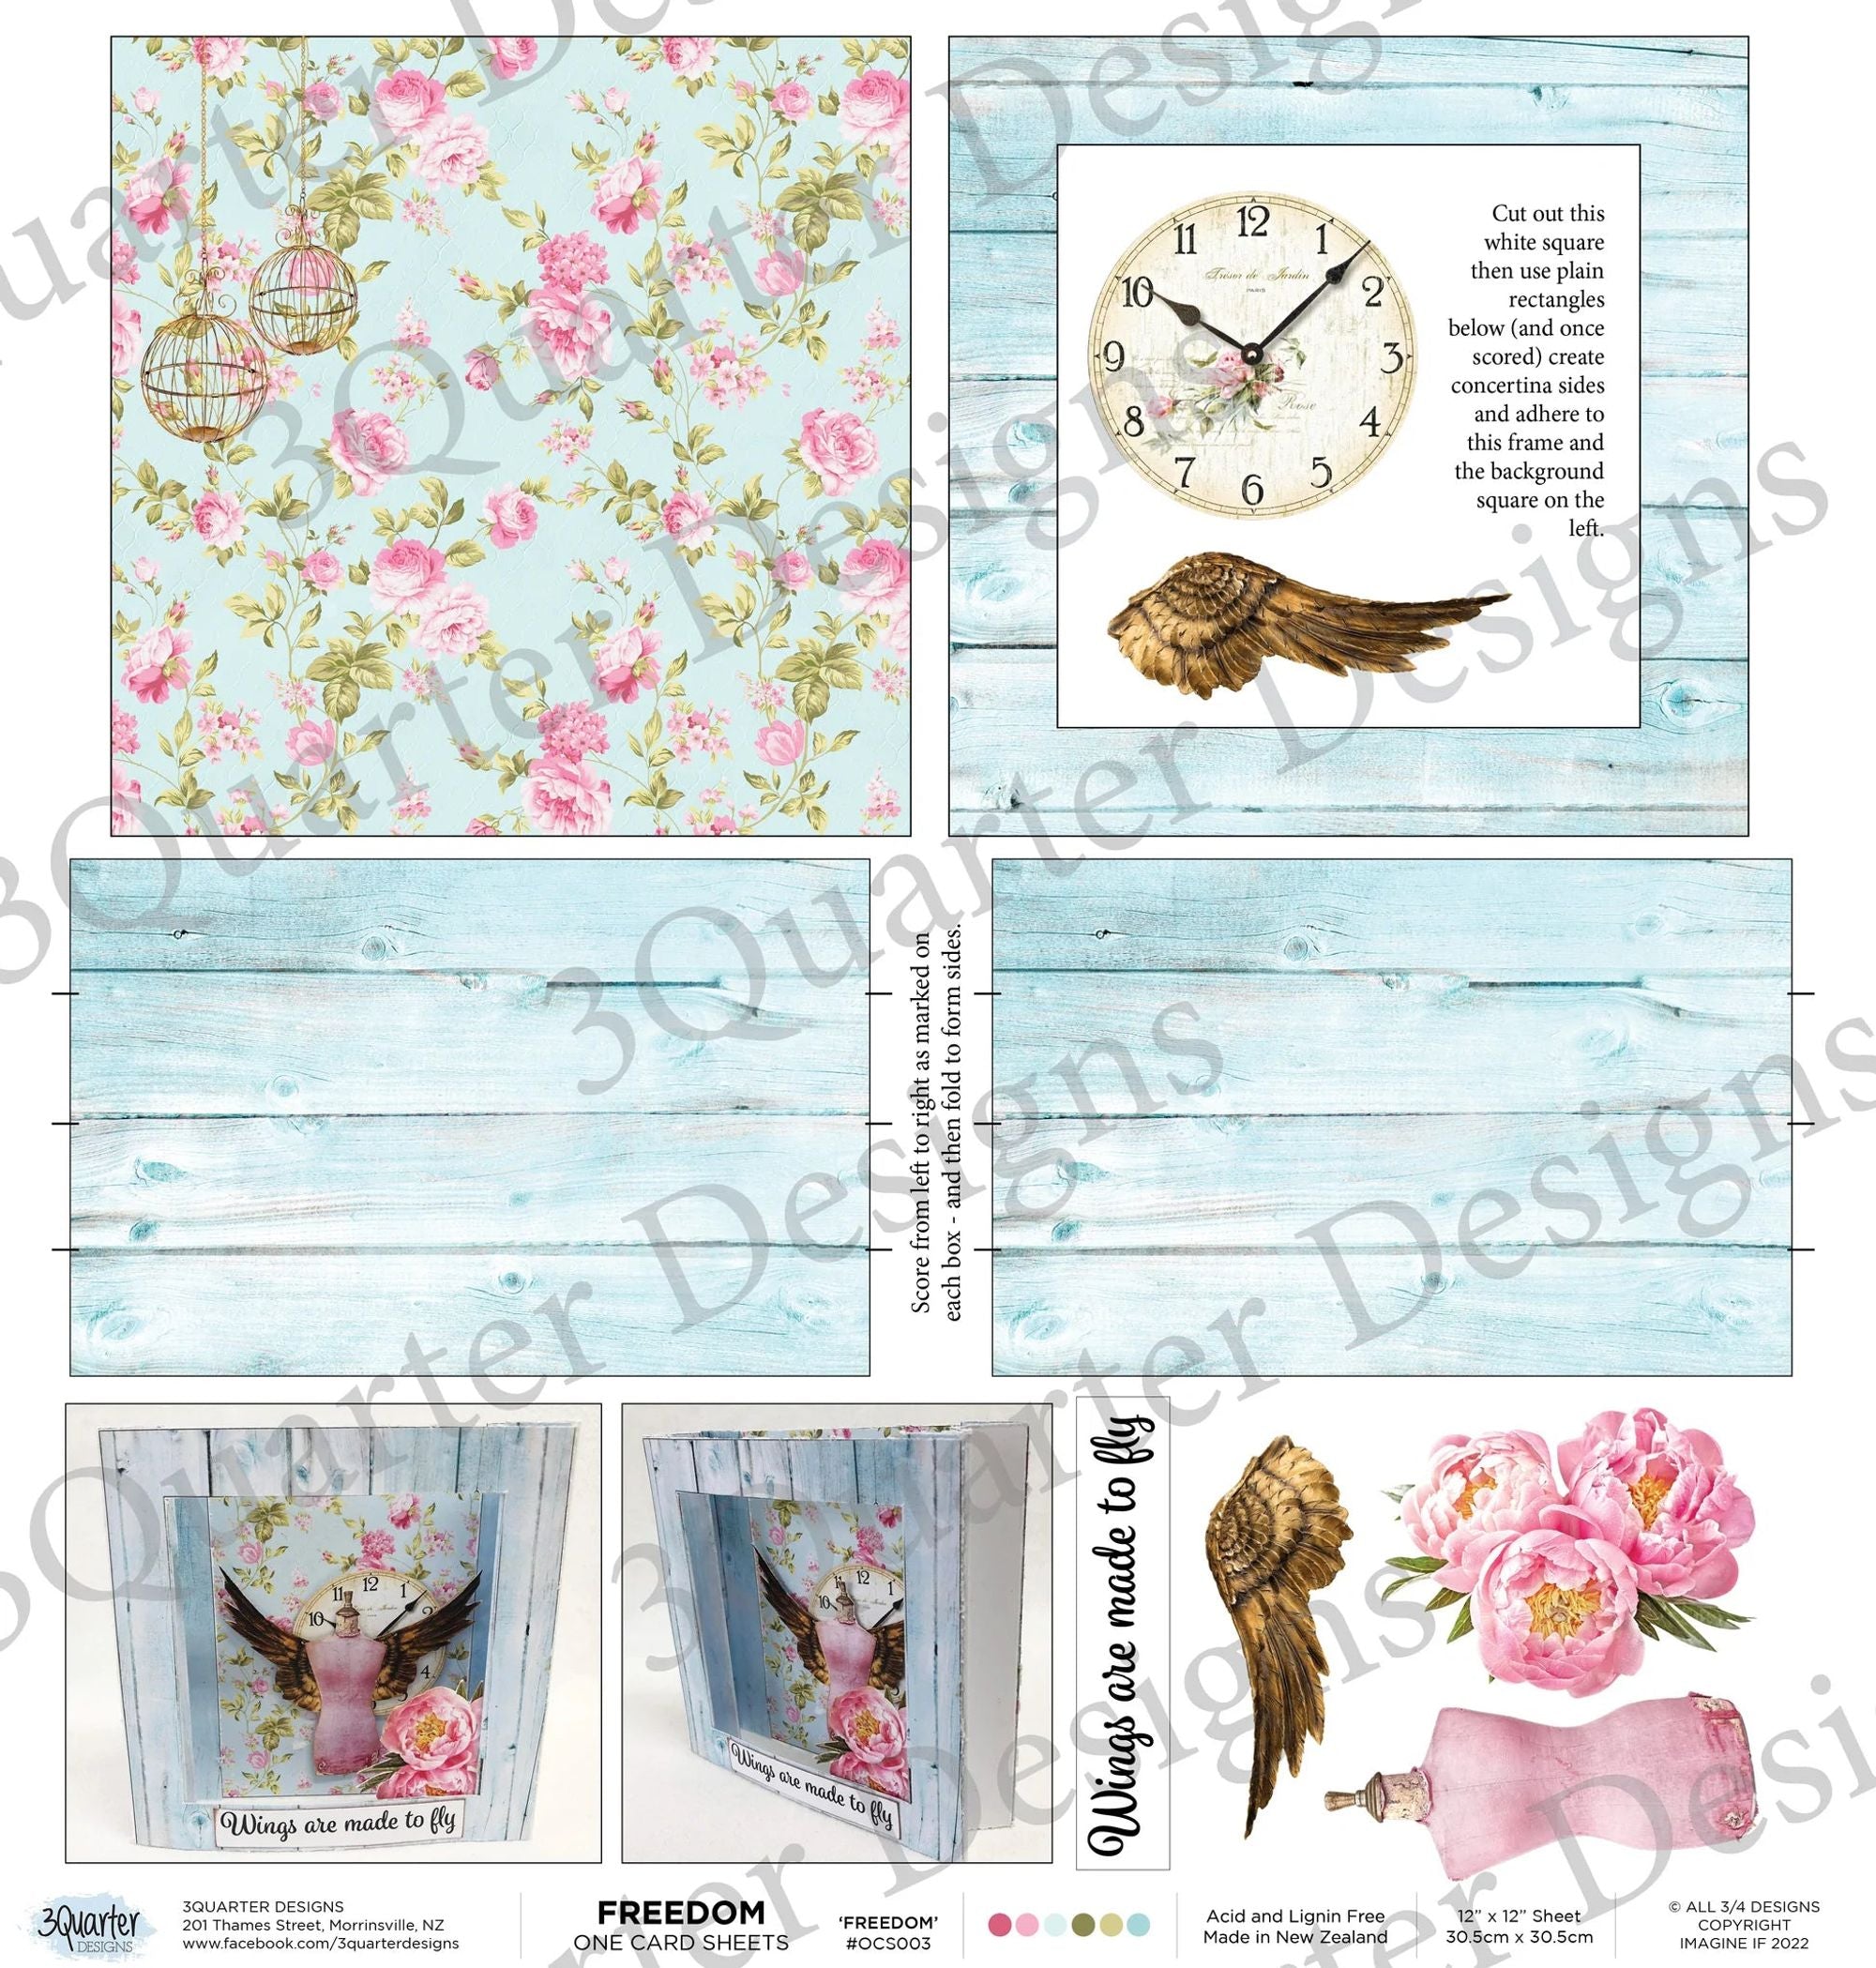 3Quarter Designs - One Card Project Sheet - Freedom